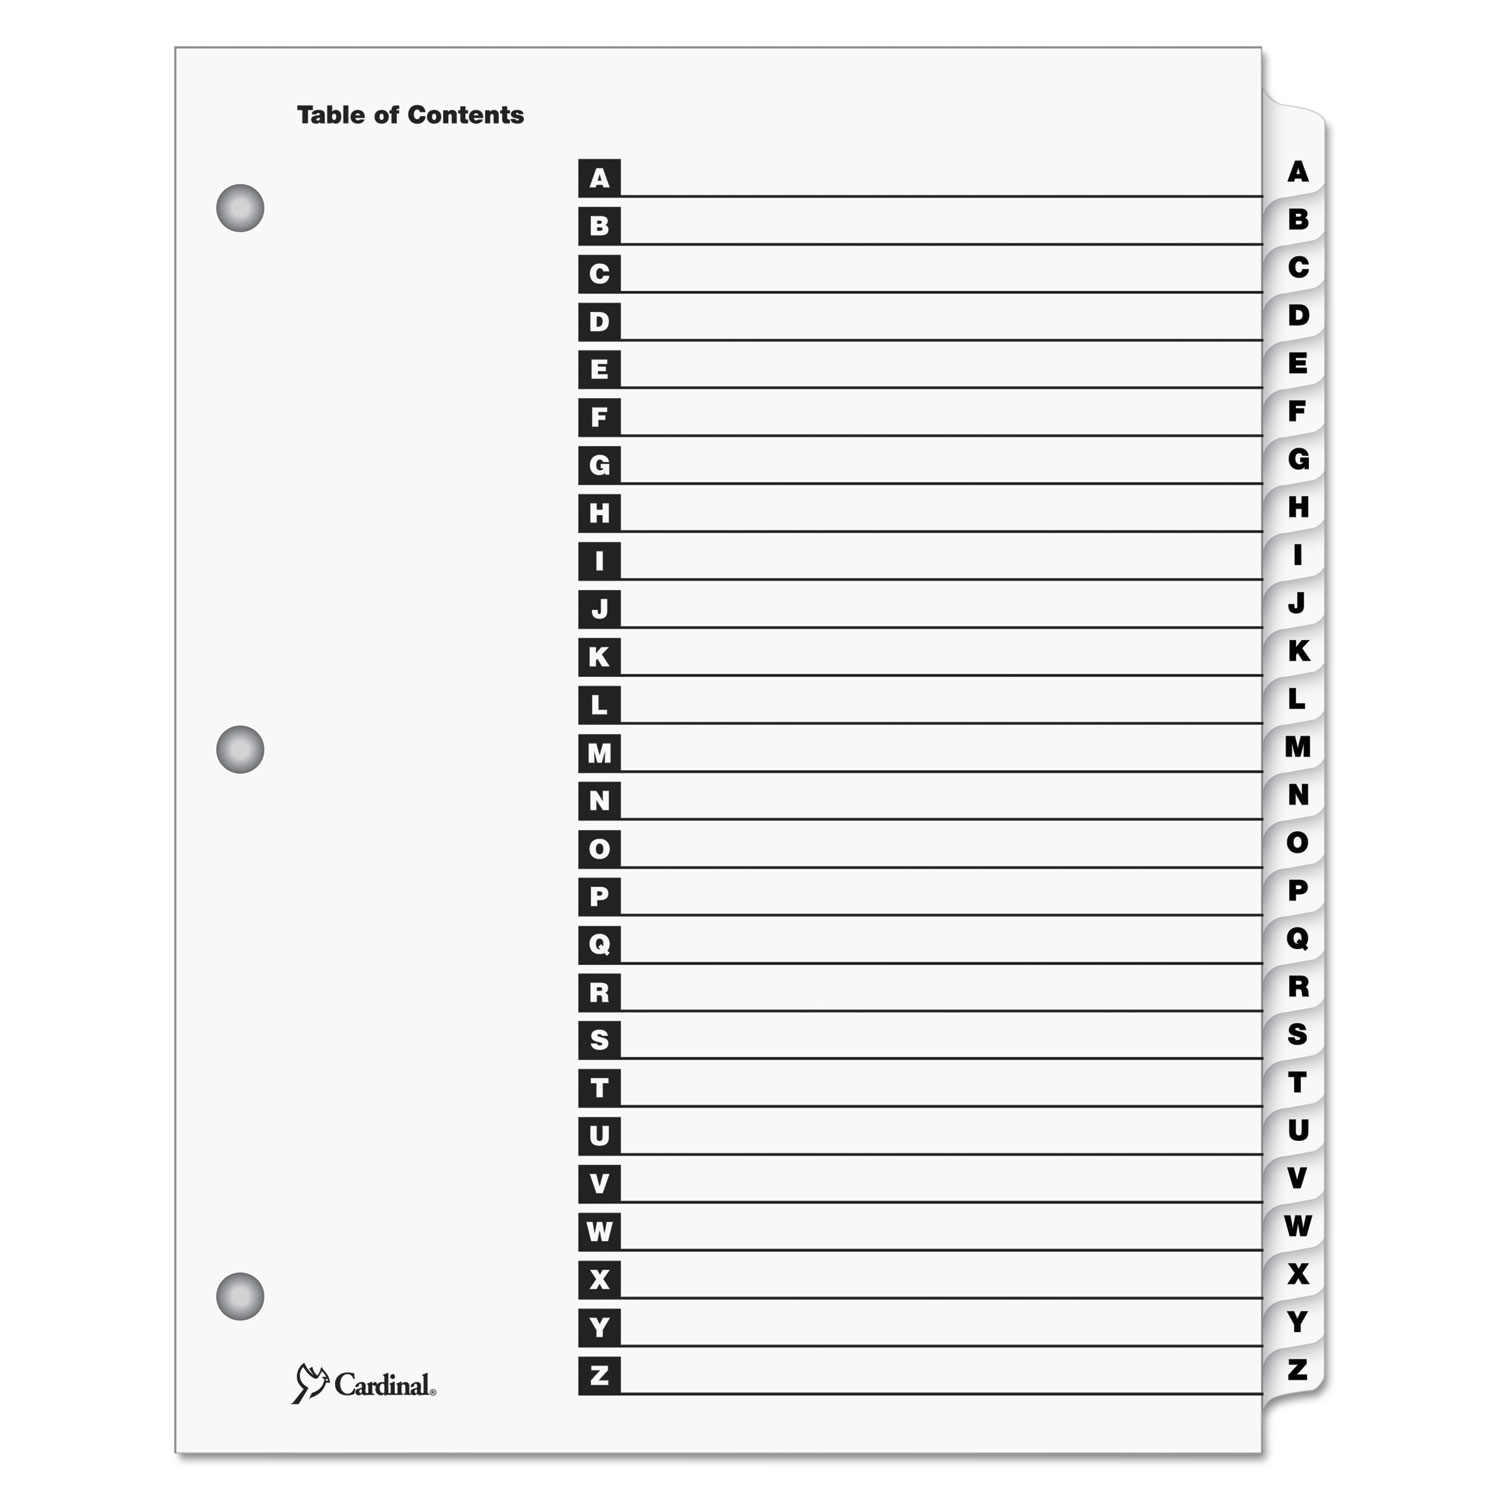  Cardinal 60213 OneStep Printable Table of Contents and Dividers, 26-Tab, A to Z, 11 x 8.5, White, 1 Set (CRD60213) 